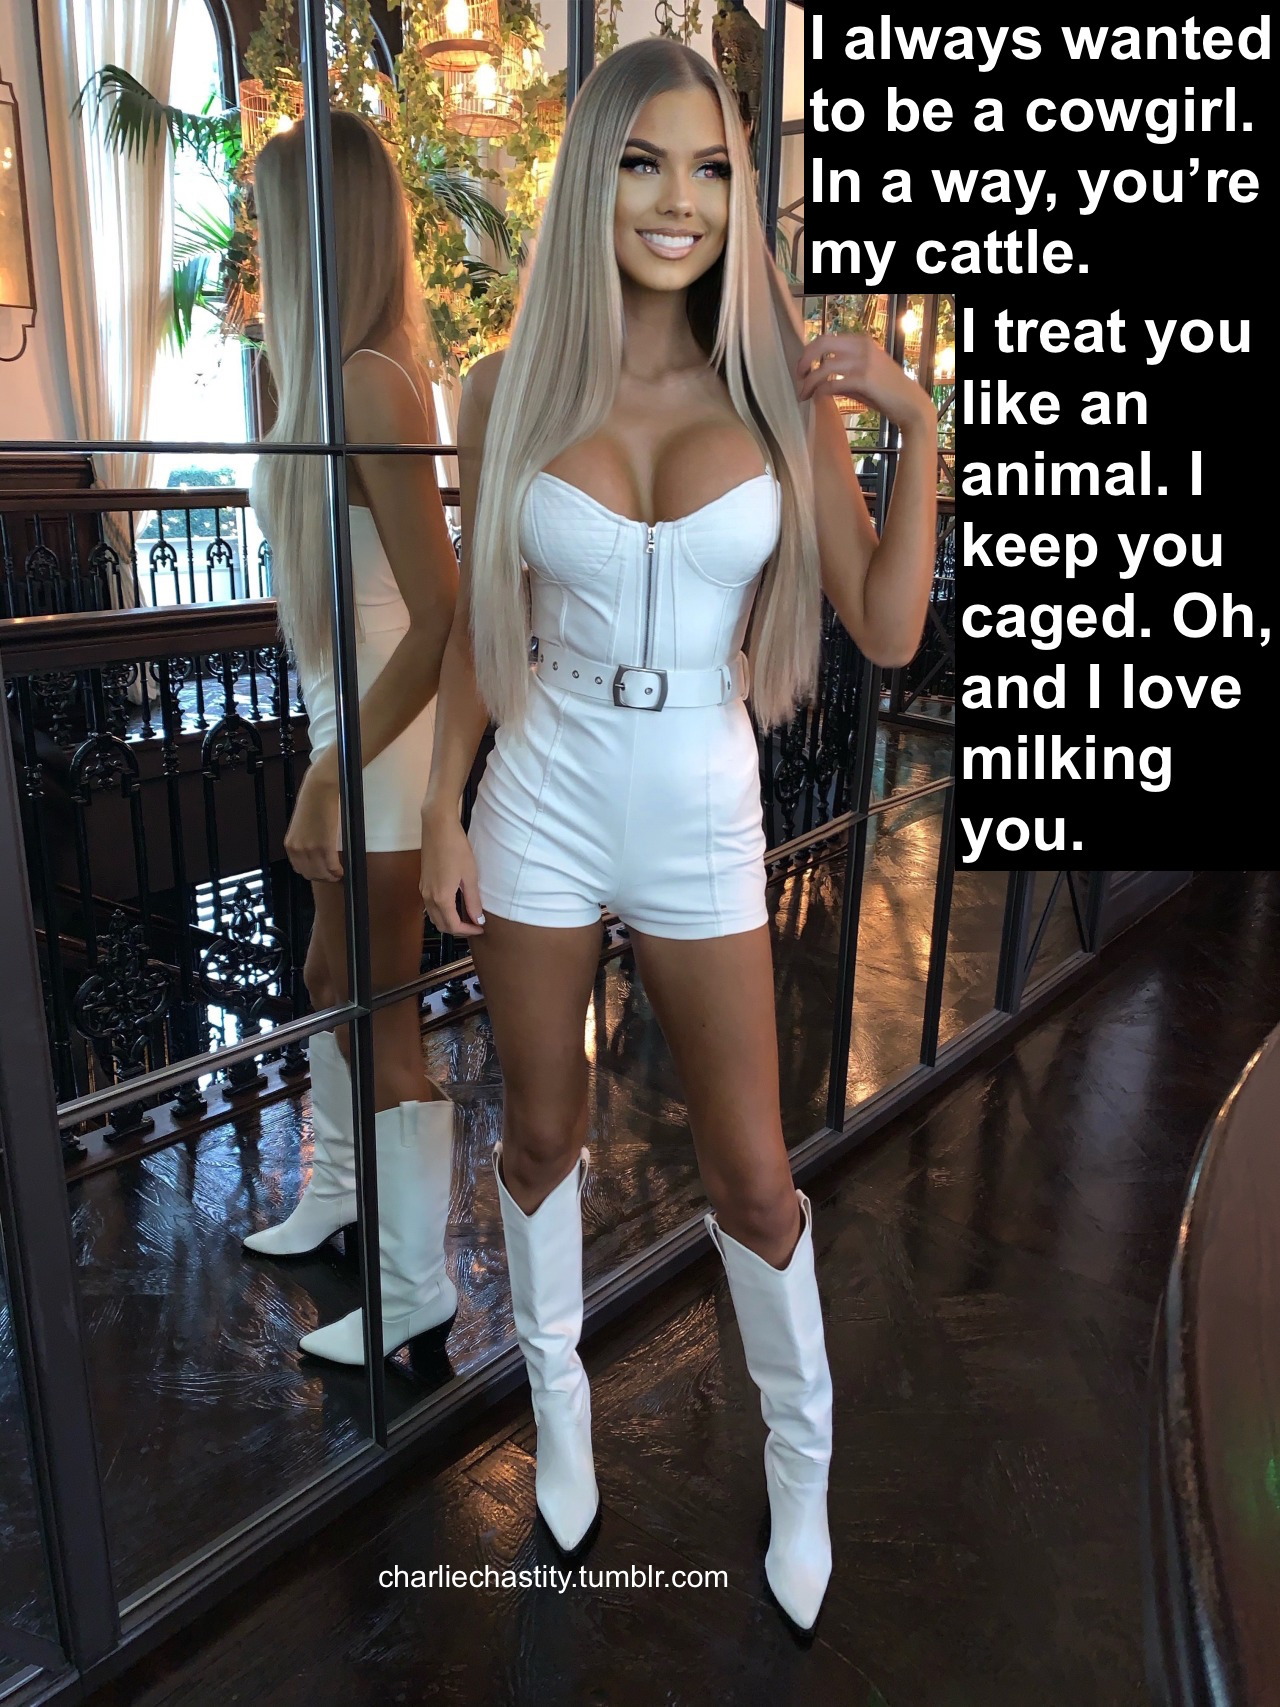 I always wanted to be a cowgirl. In a way, you’re my cattle.I treat you like an animal. I keep you caged. Oh, and I love milking you.